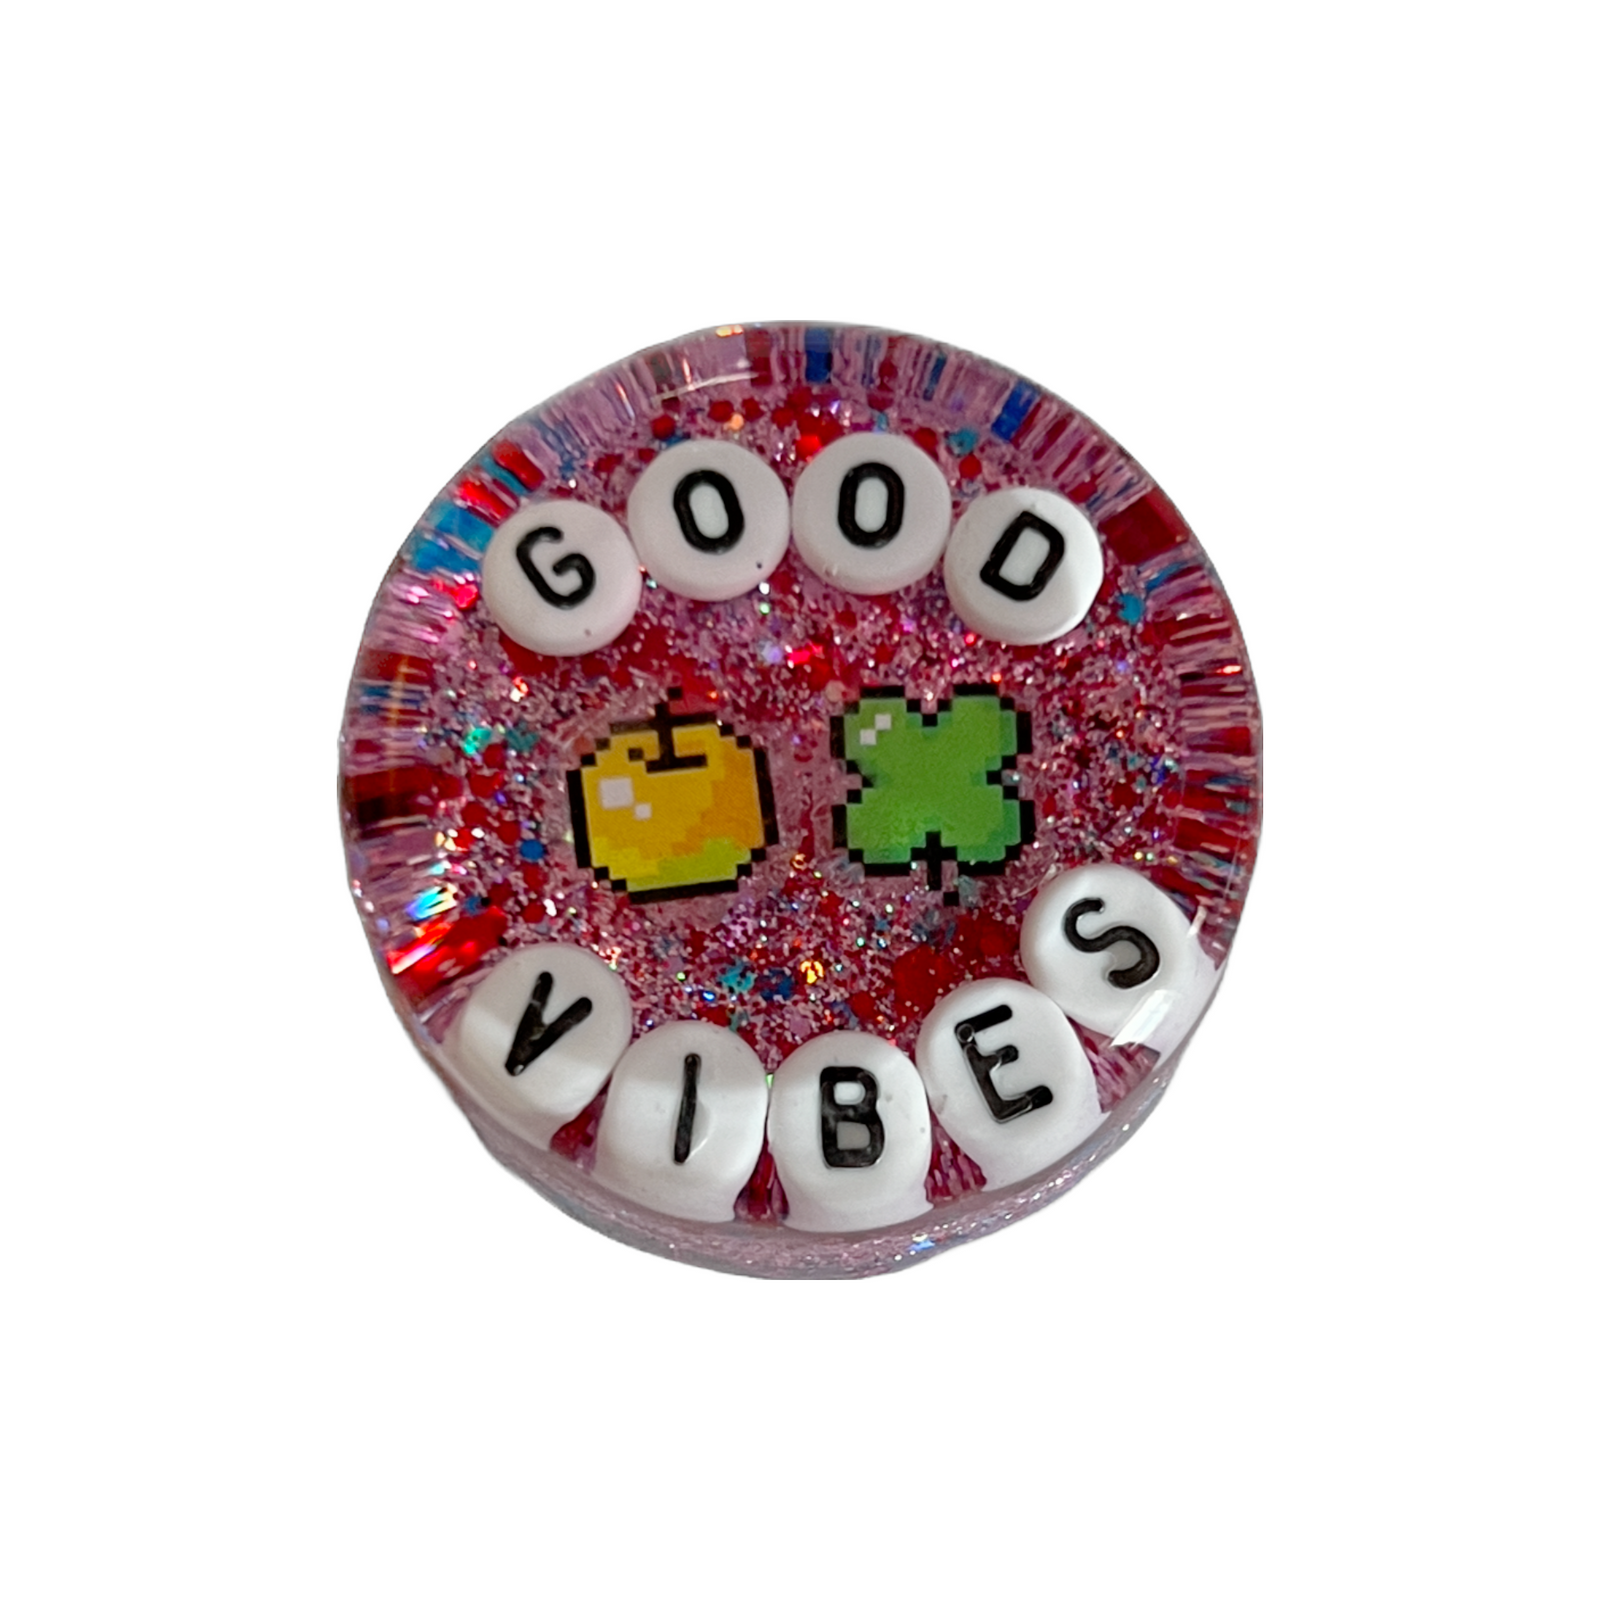 Good Vibes - Shower Art - READY TO SHIP